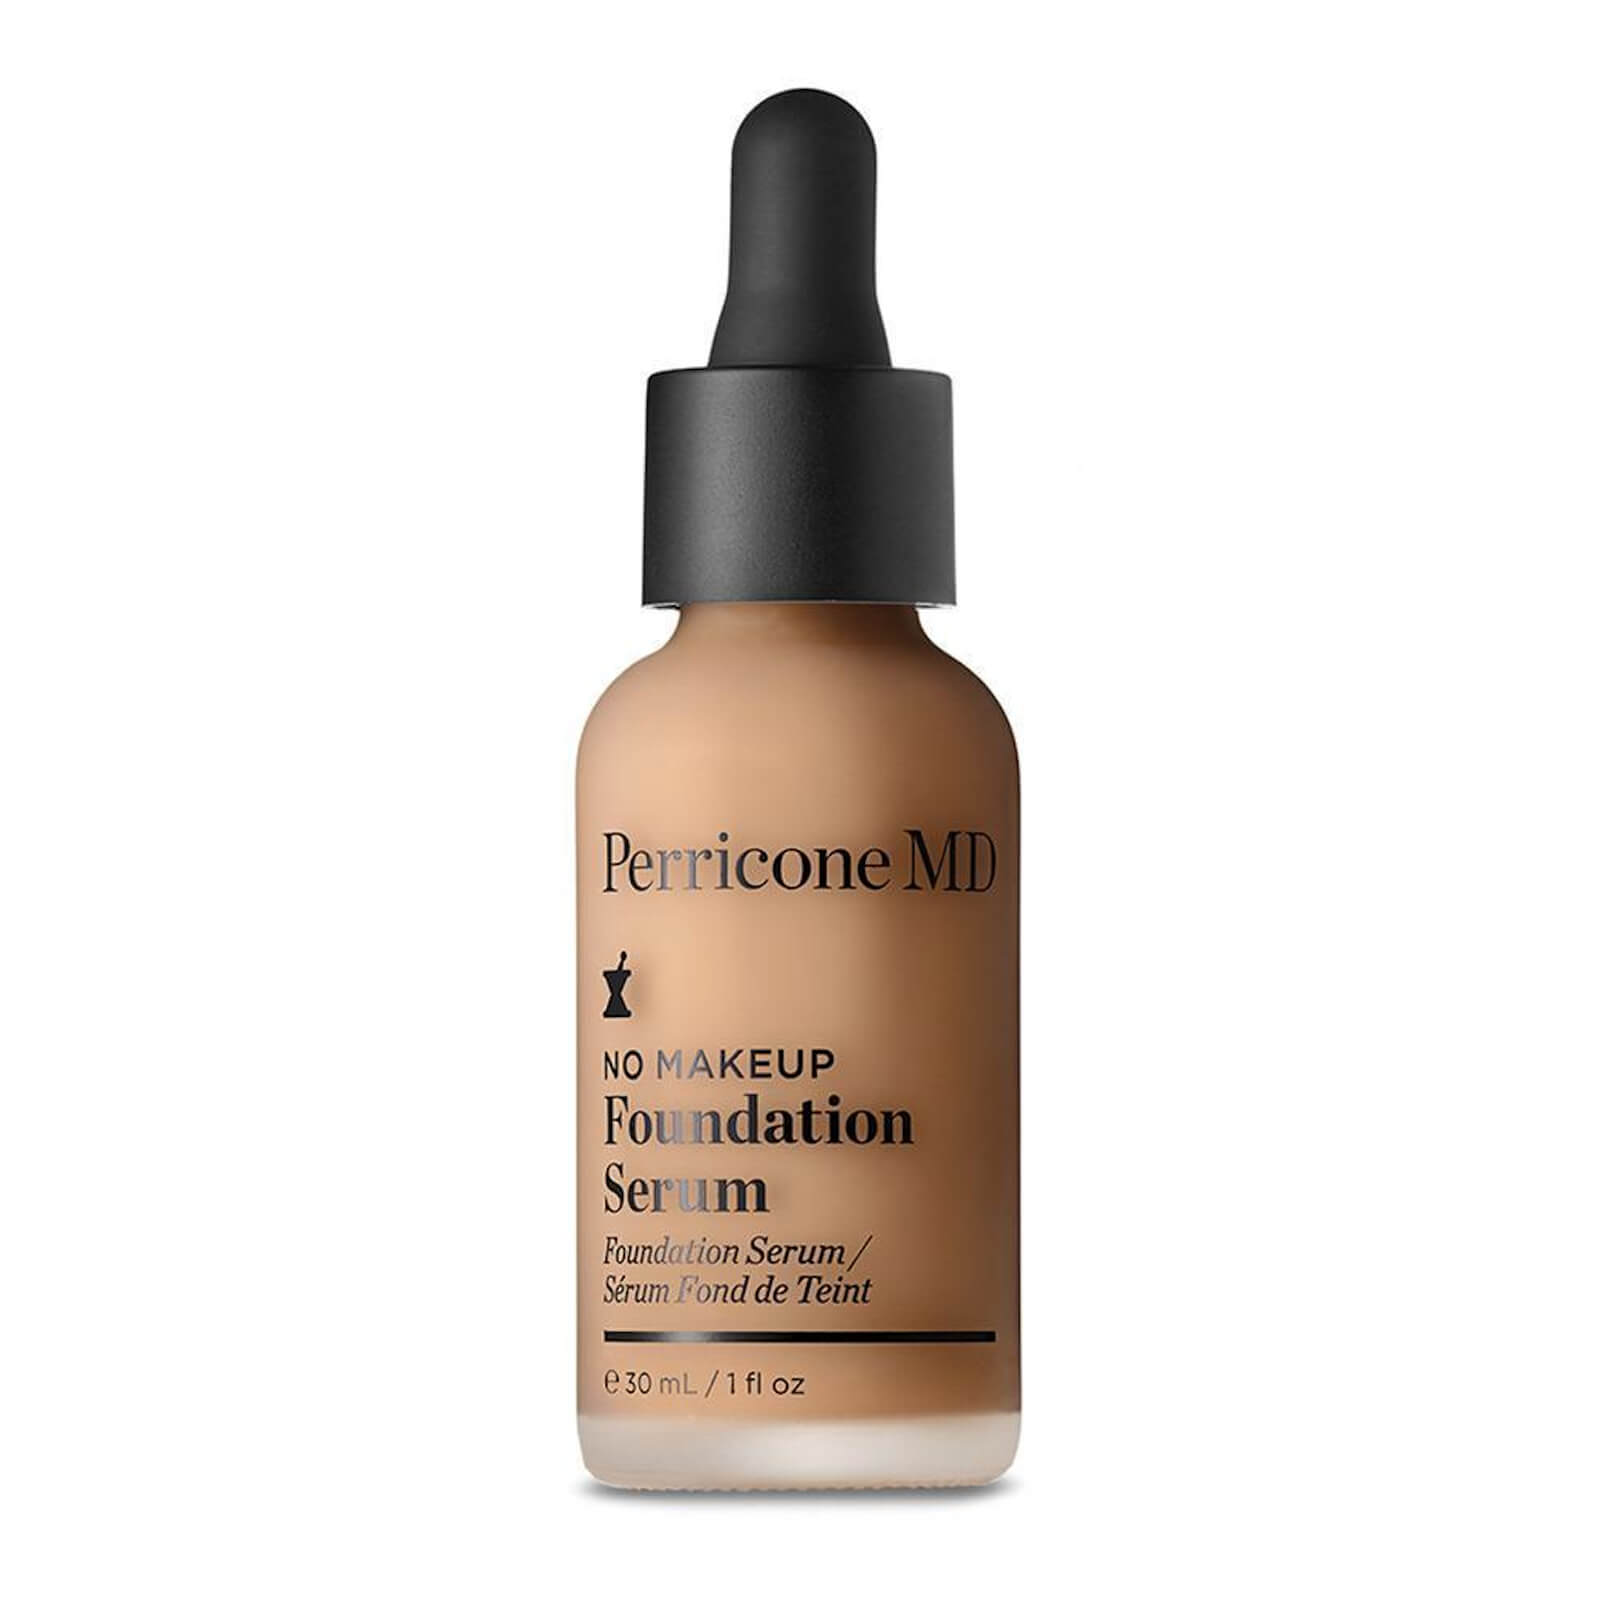 Perricone Md No Makeup Foundation Serum Broad Spectrum Spf20 30Ml (Various Shades) - 5 Beige